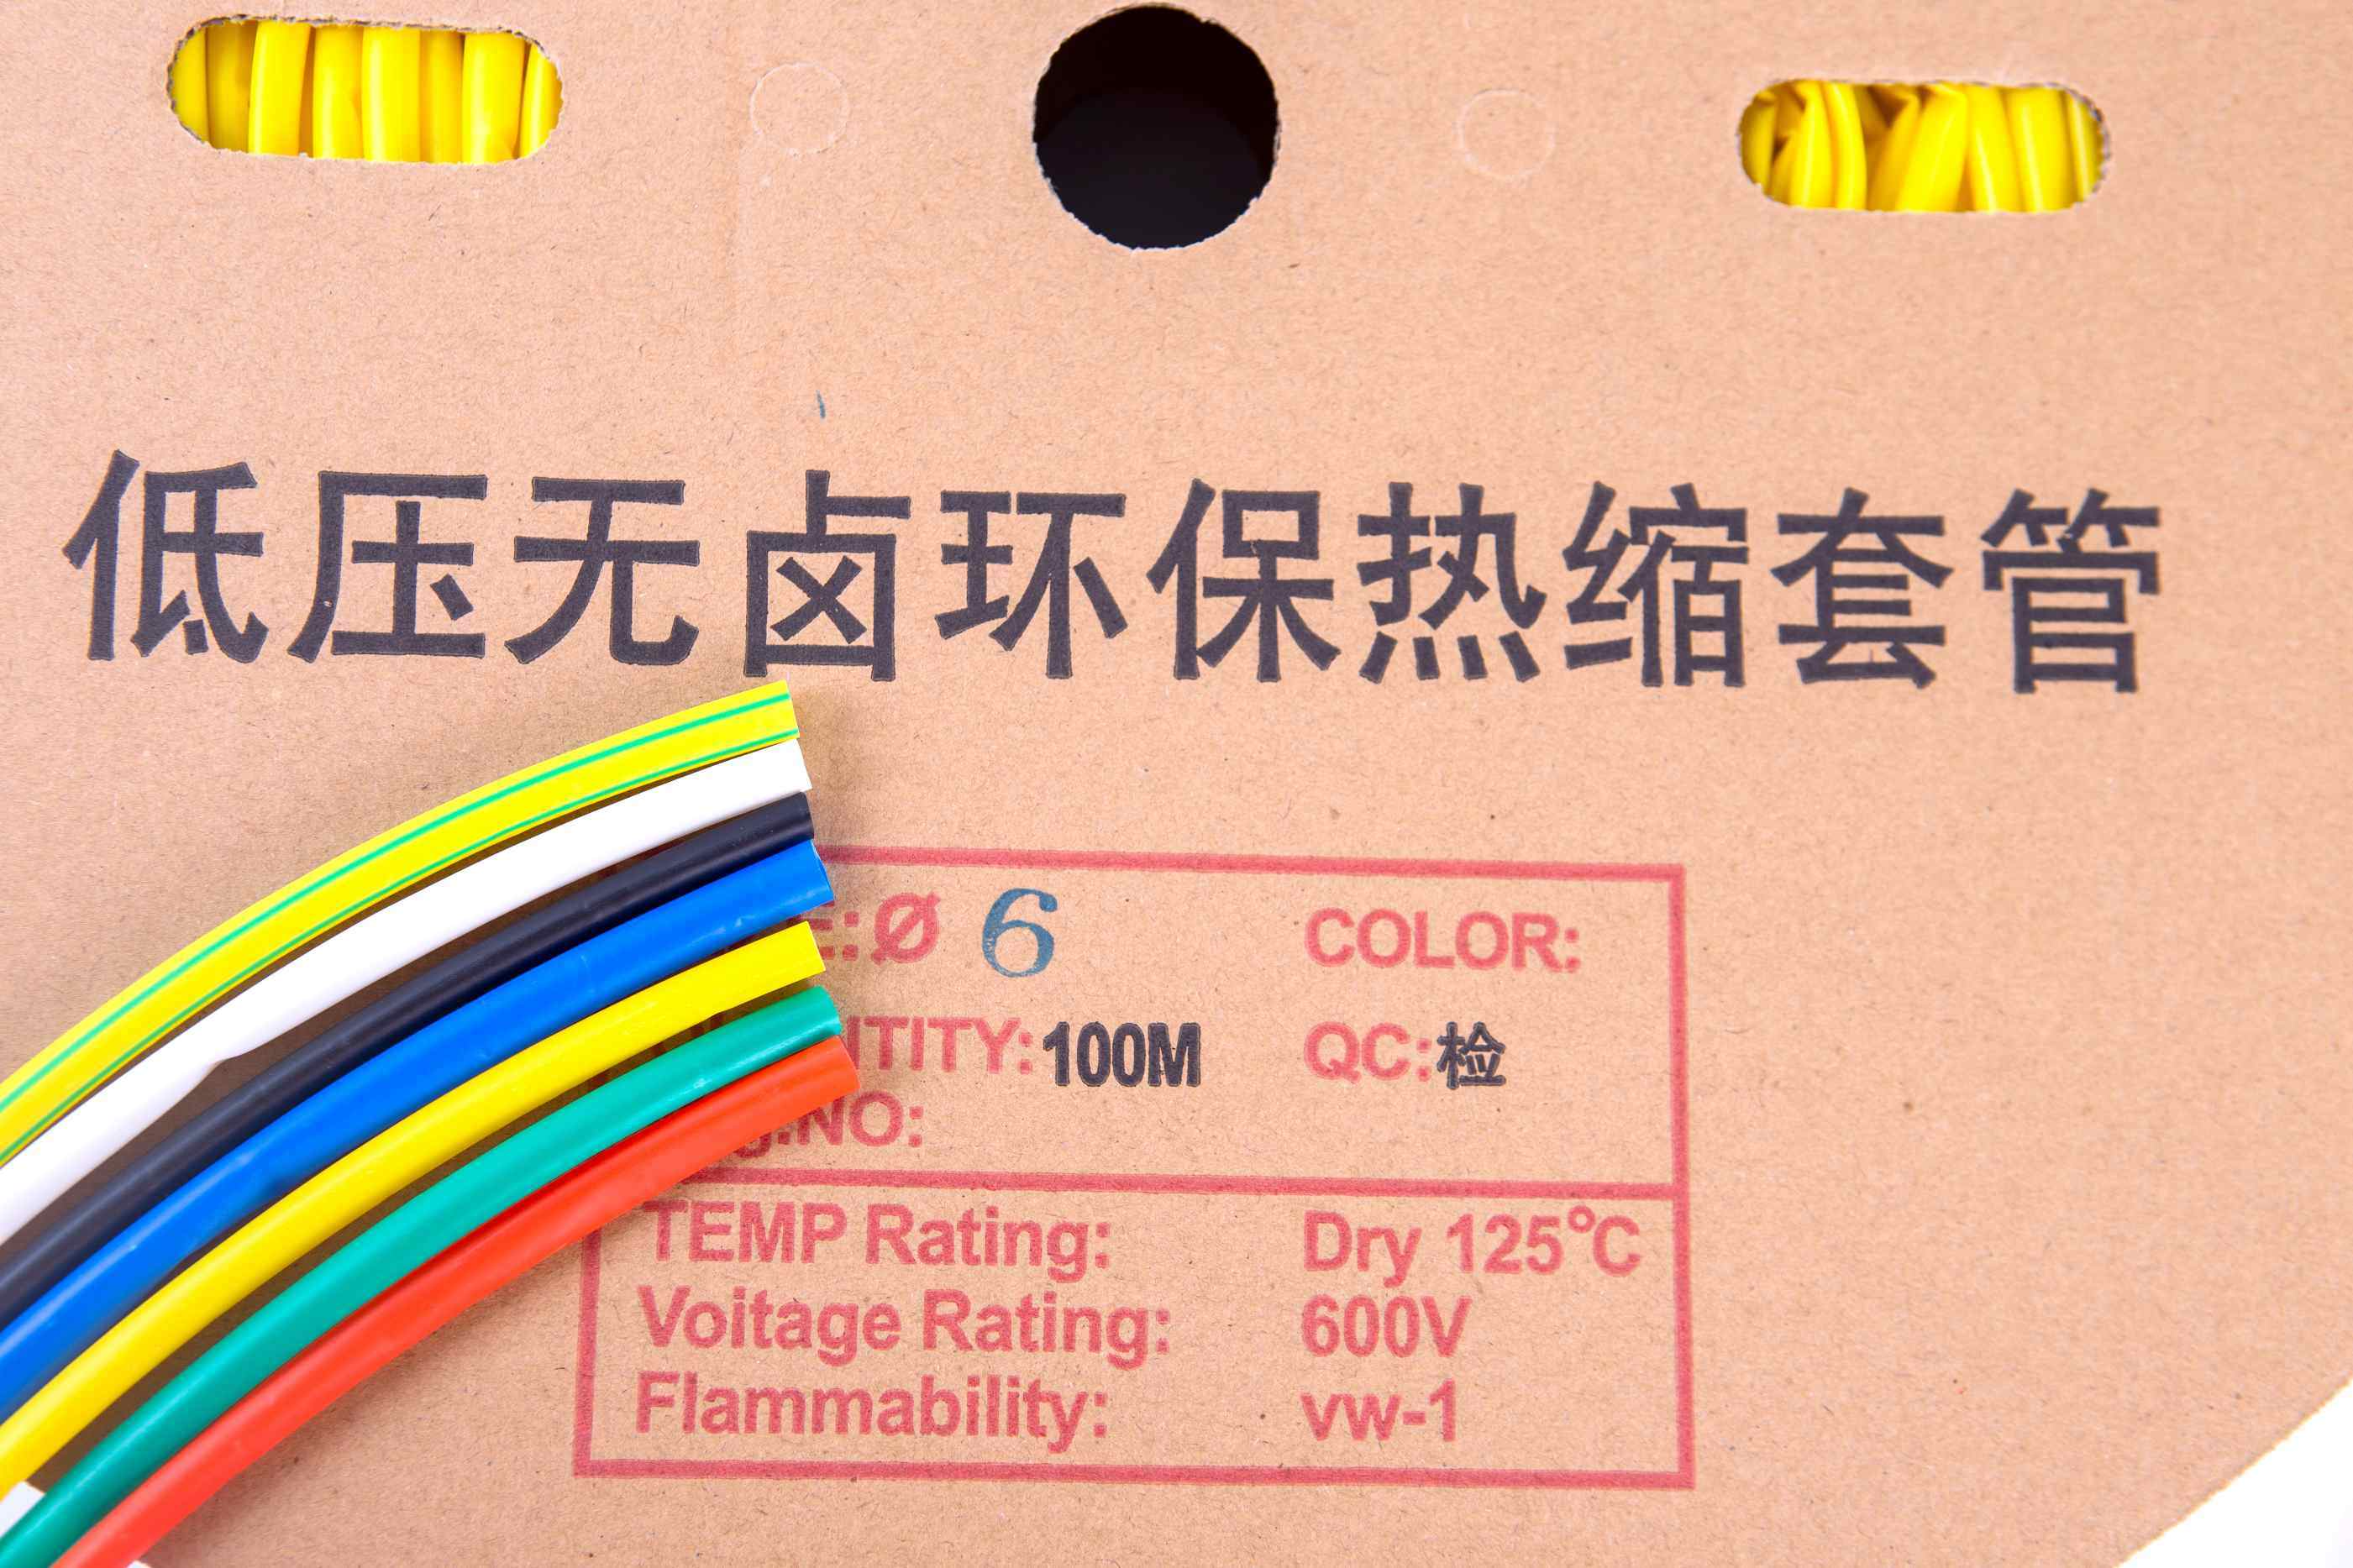 The Heat Shrink Tube Has Low Temperature and High Speed